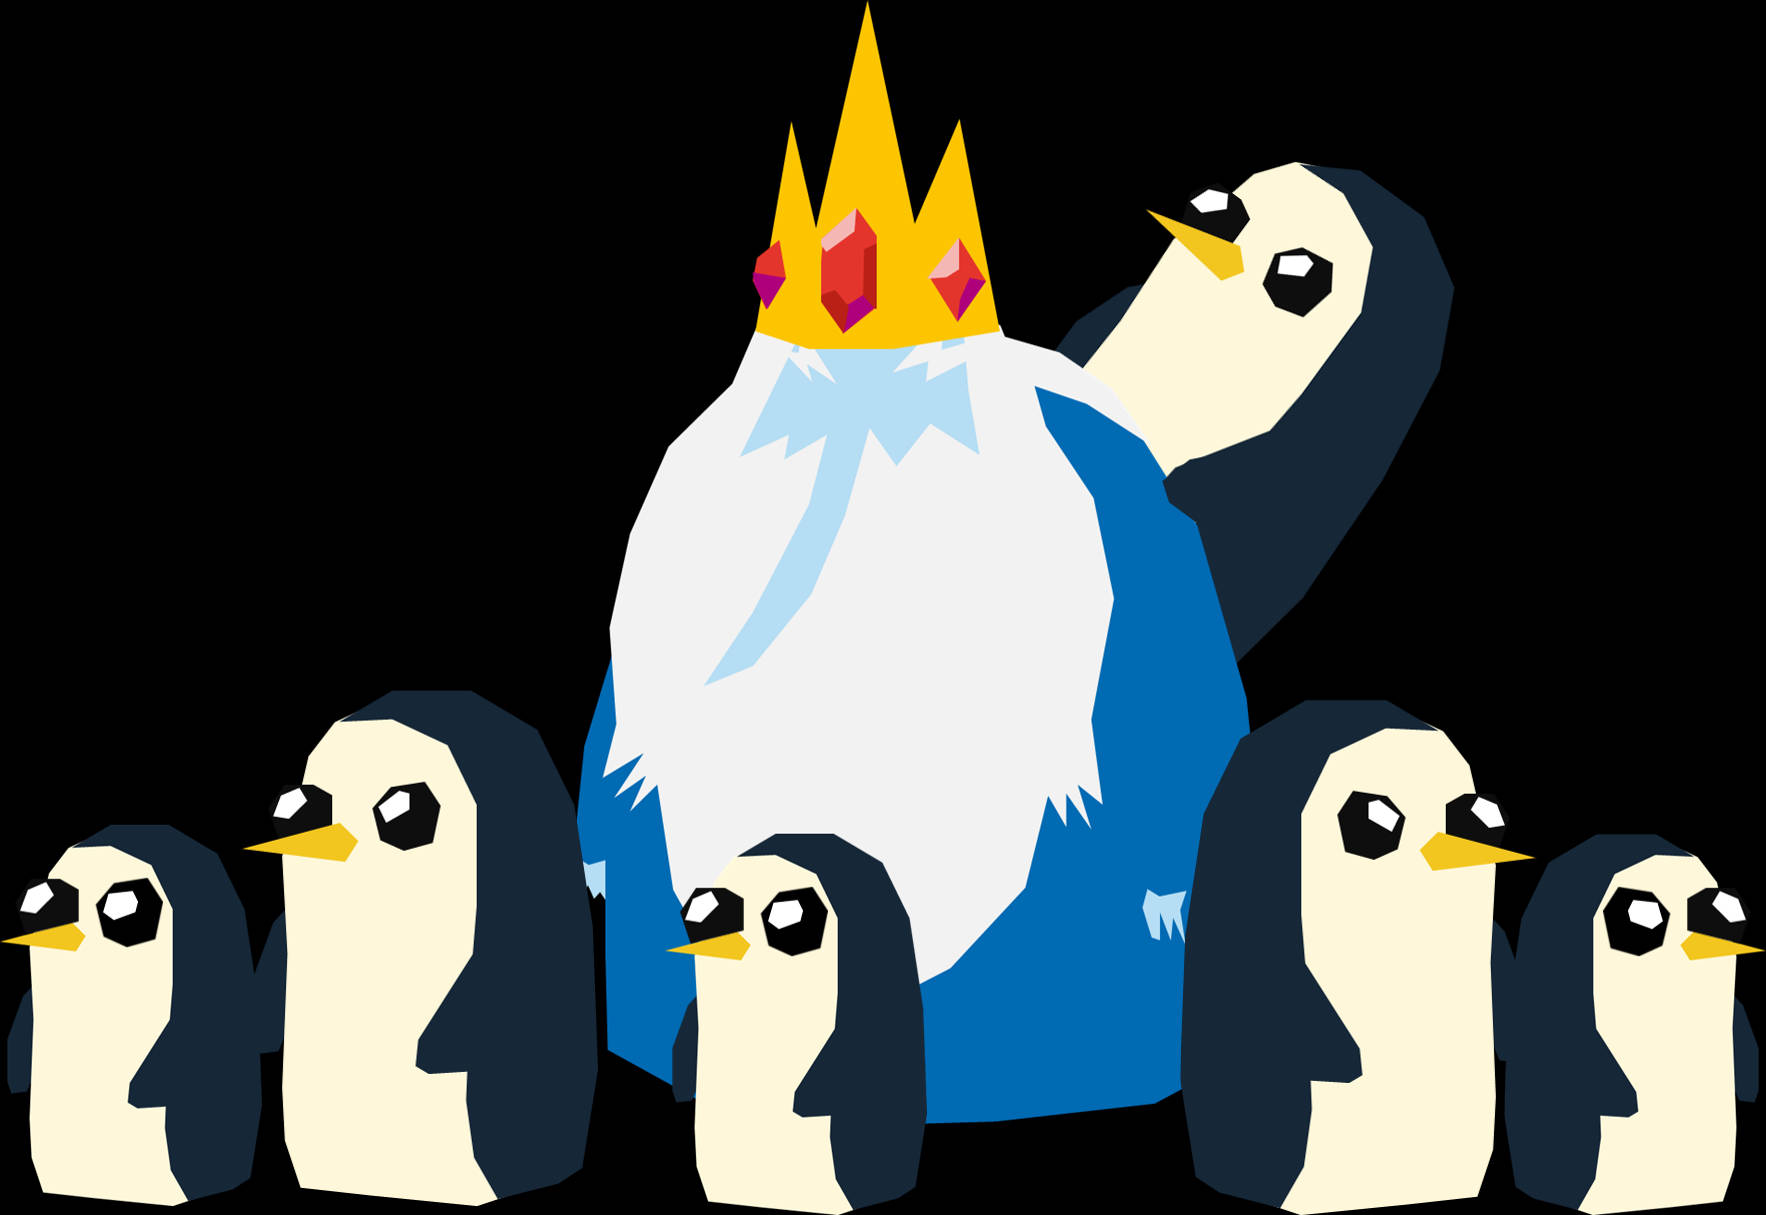 Caption: Gunter - The Adorable Trouble-maker From Adventure Time Background